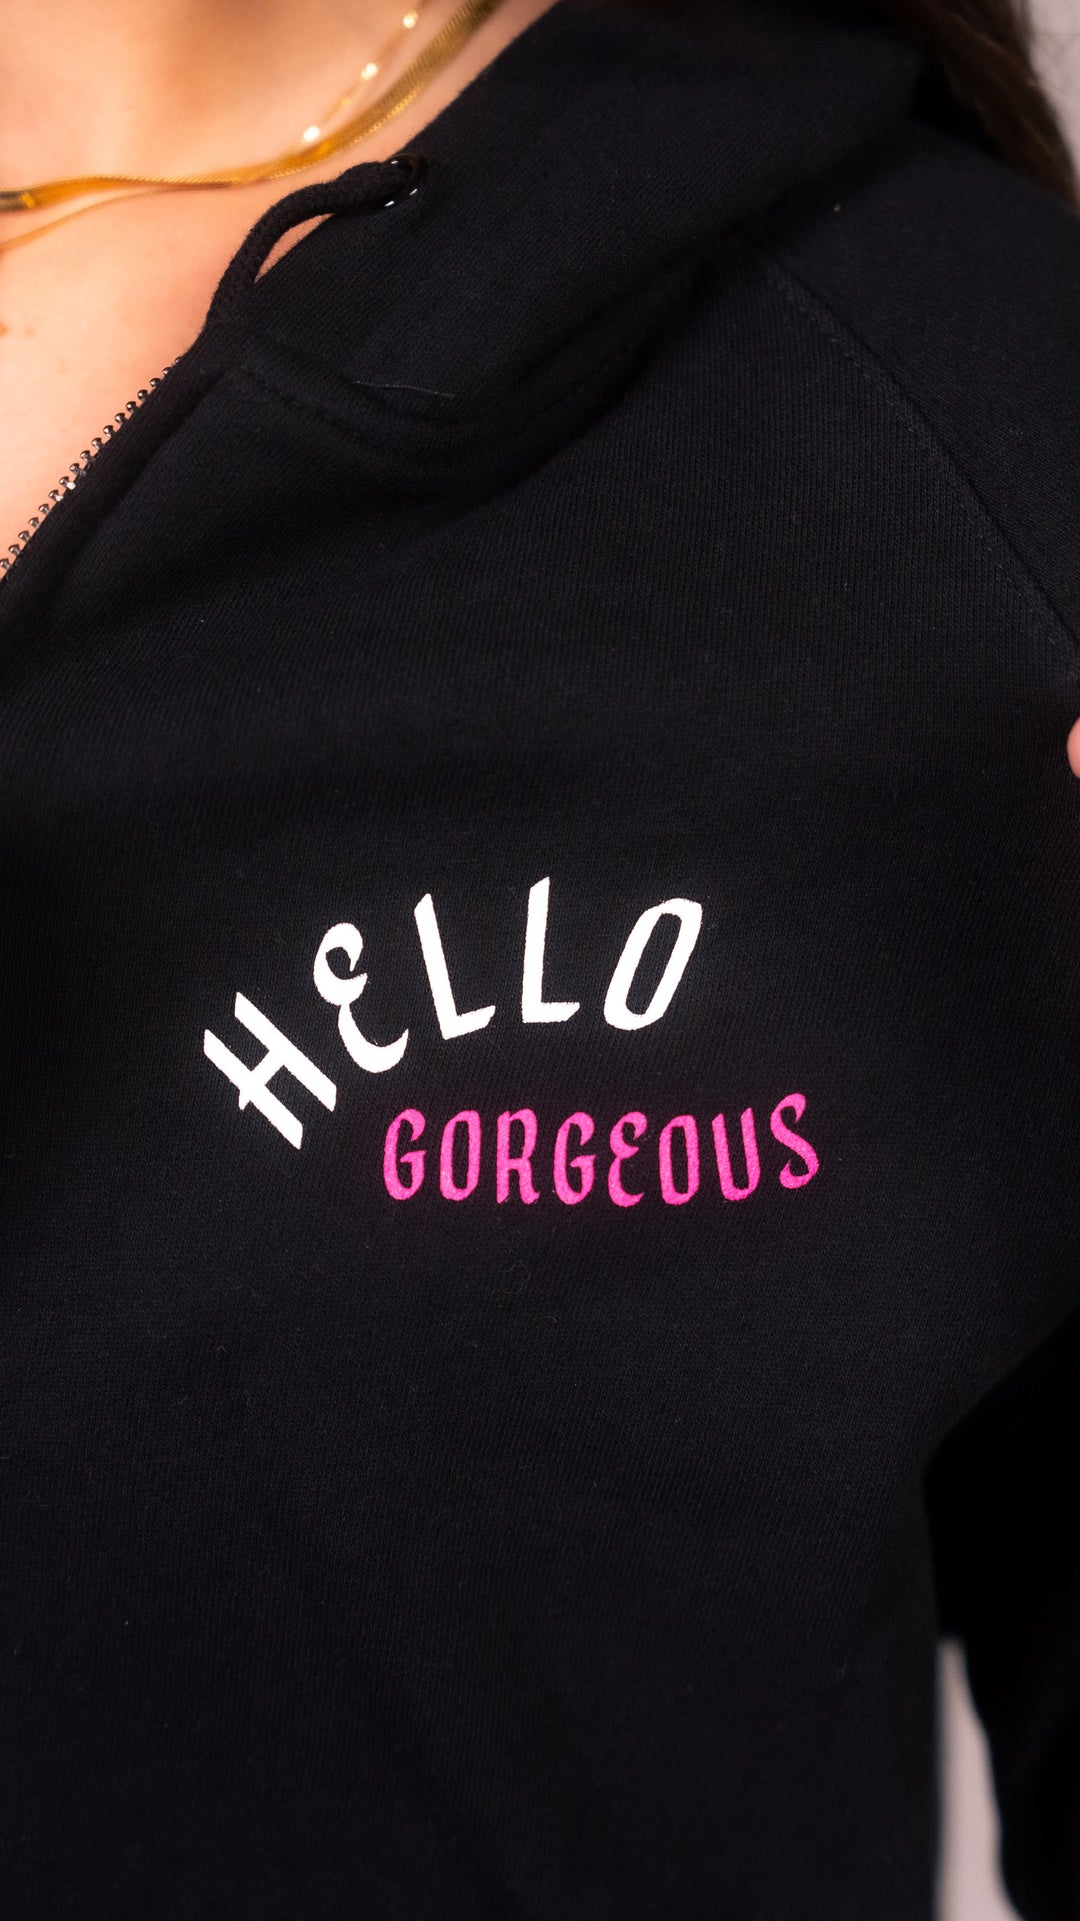 PLA Lash Sweater, Black Zip Up (close up view of the hello gorgeous design on the front of the sweater)